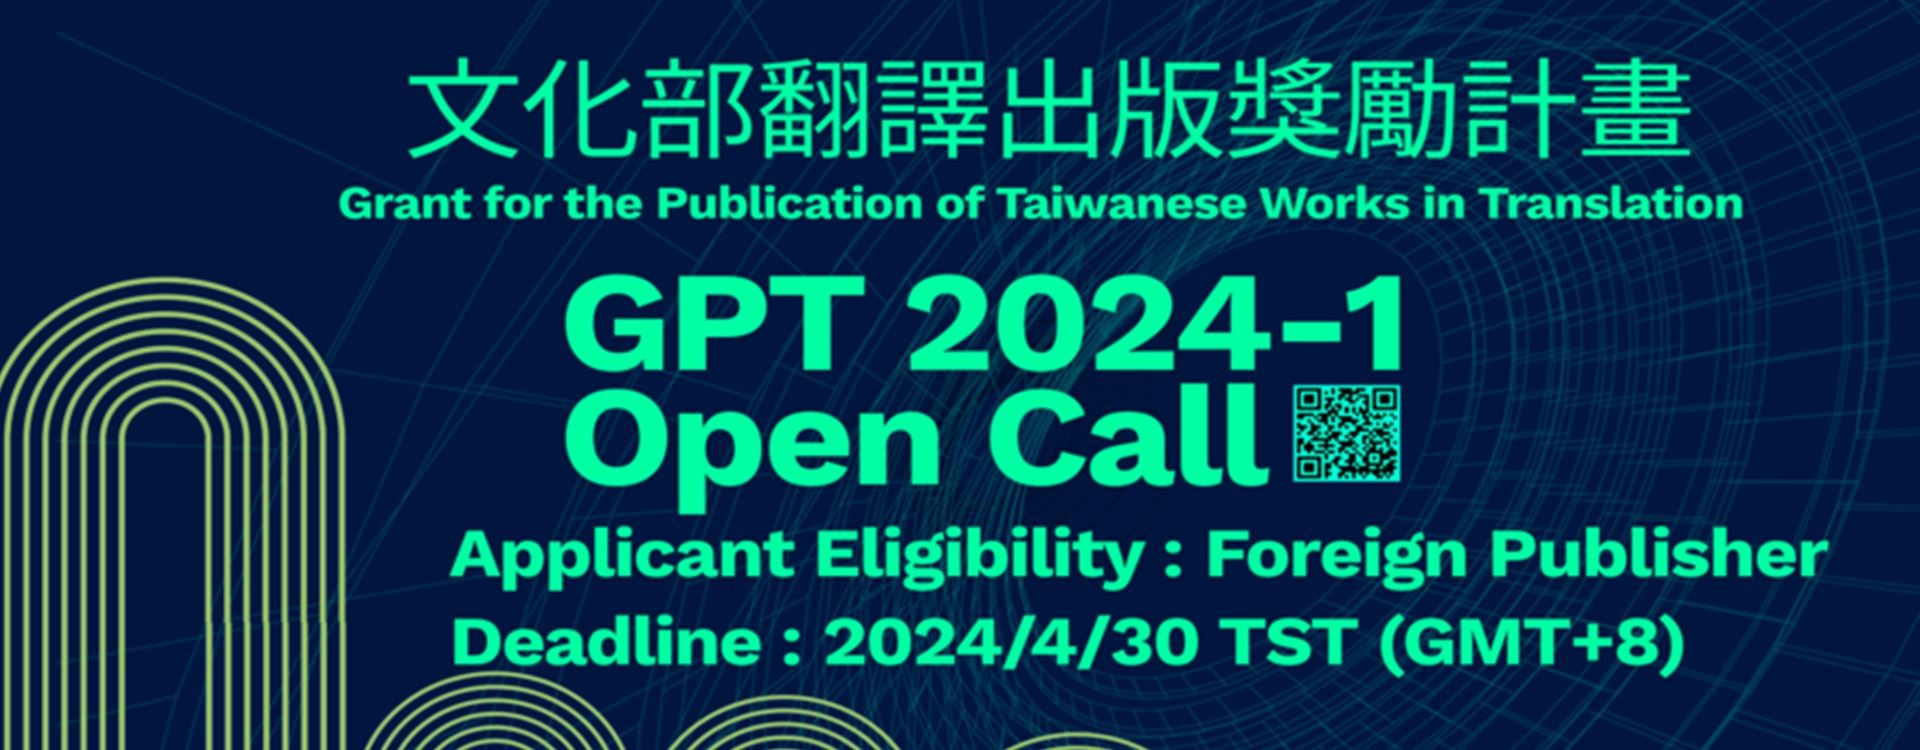 GPT 2024-1 Open Call now!